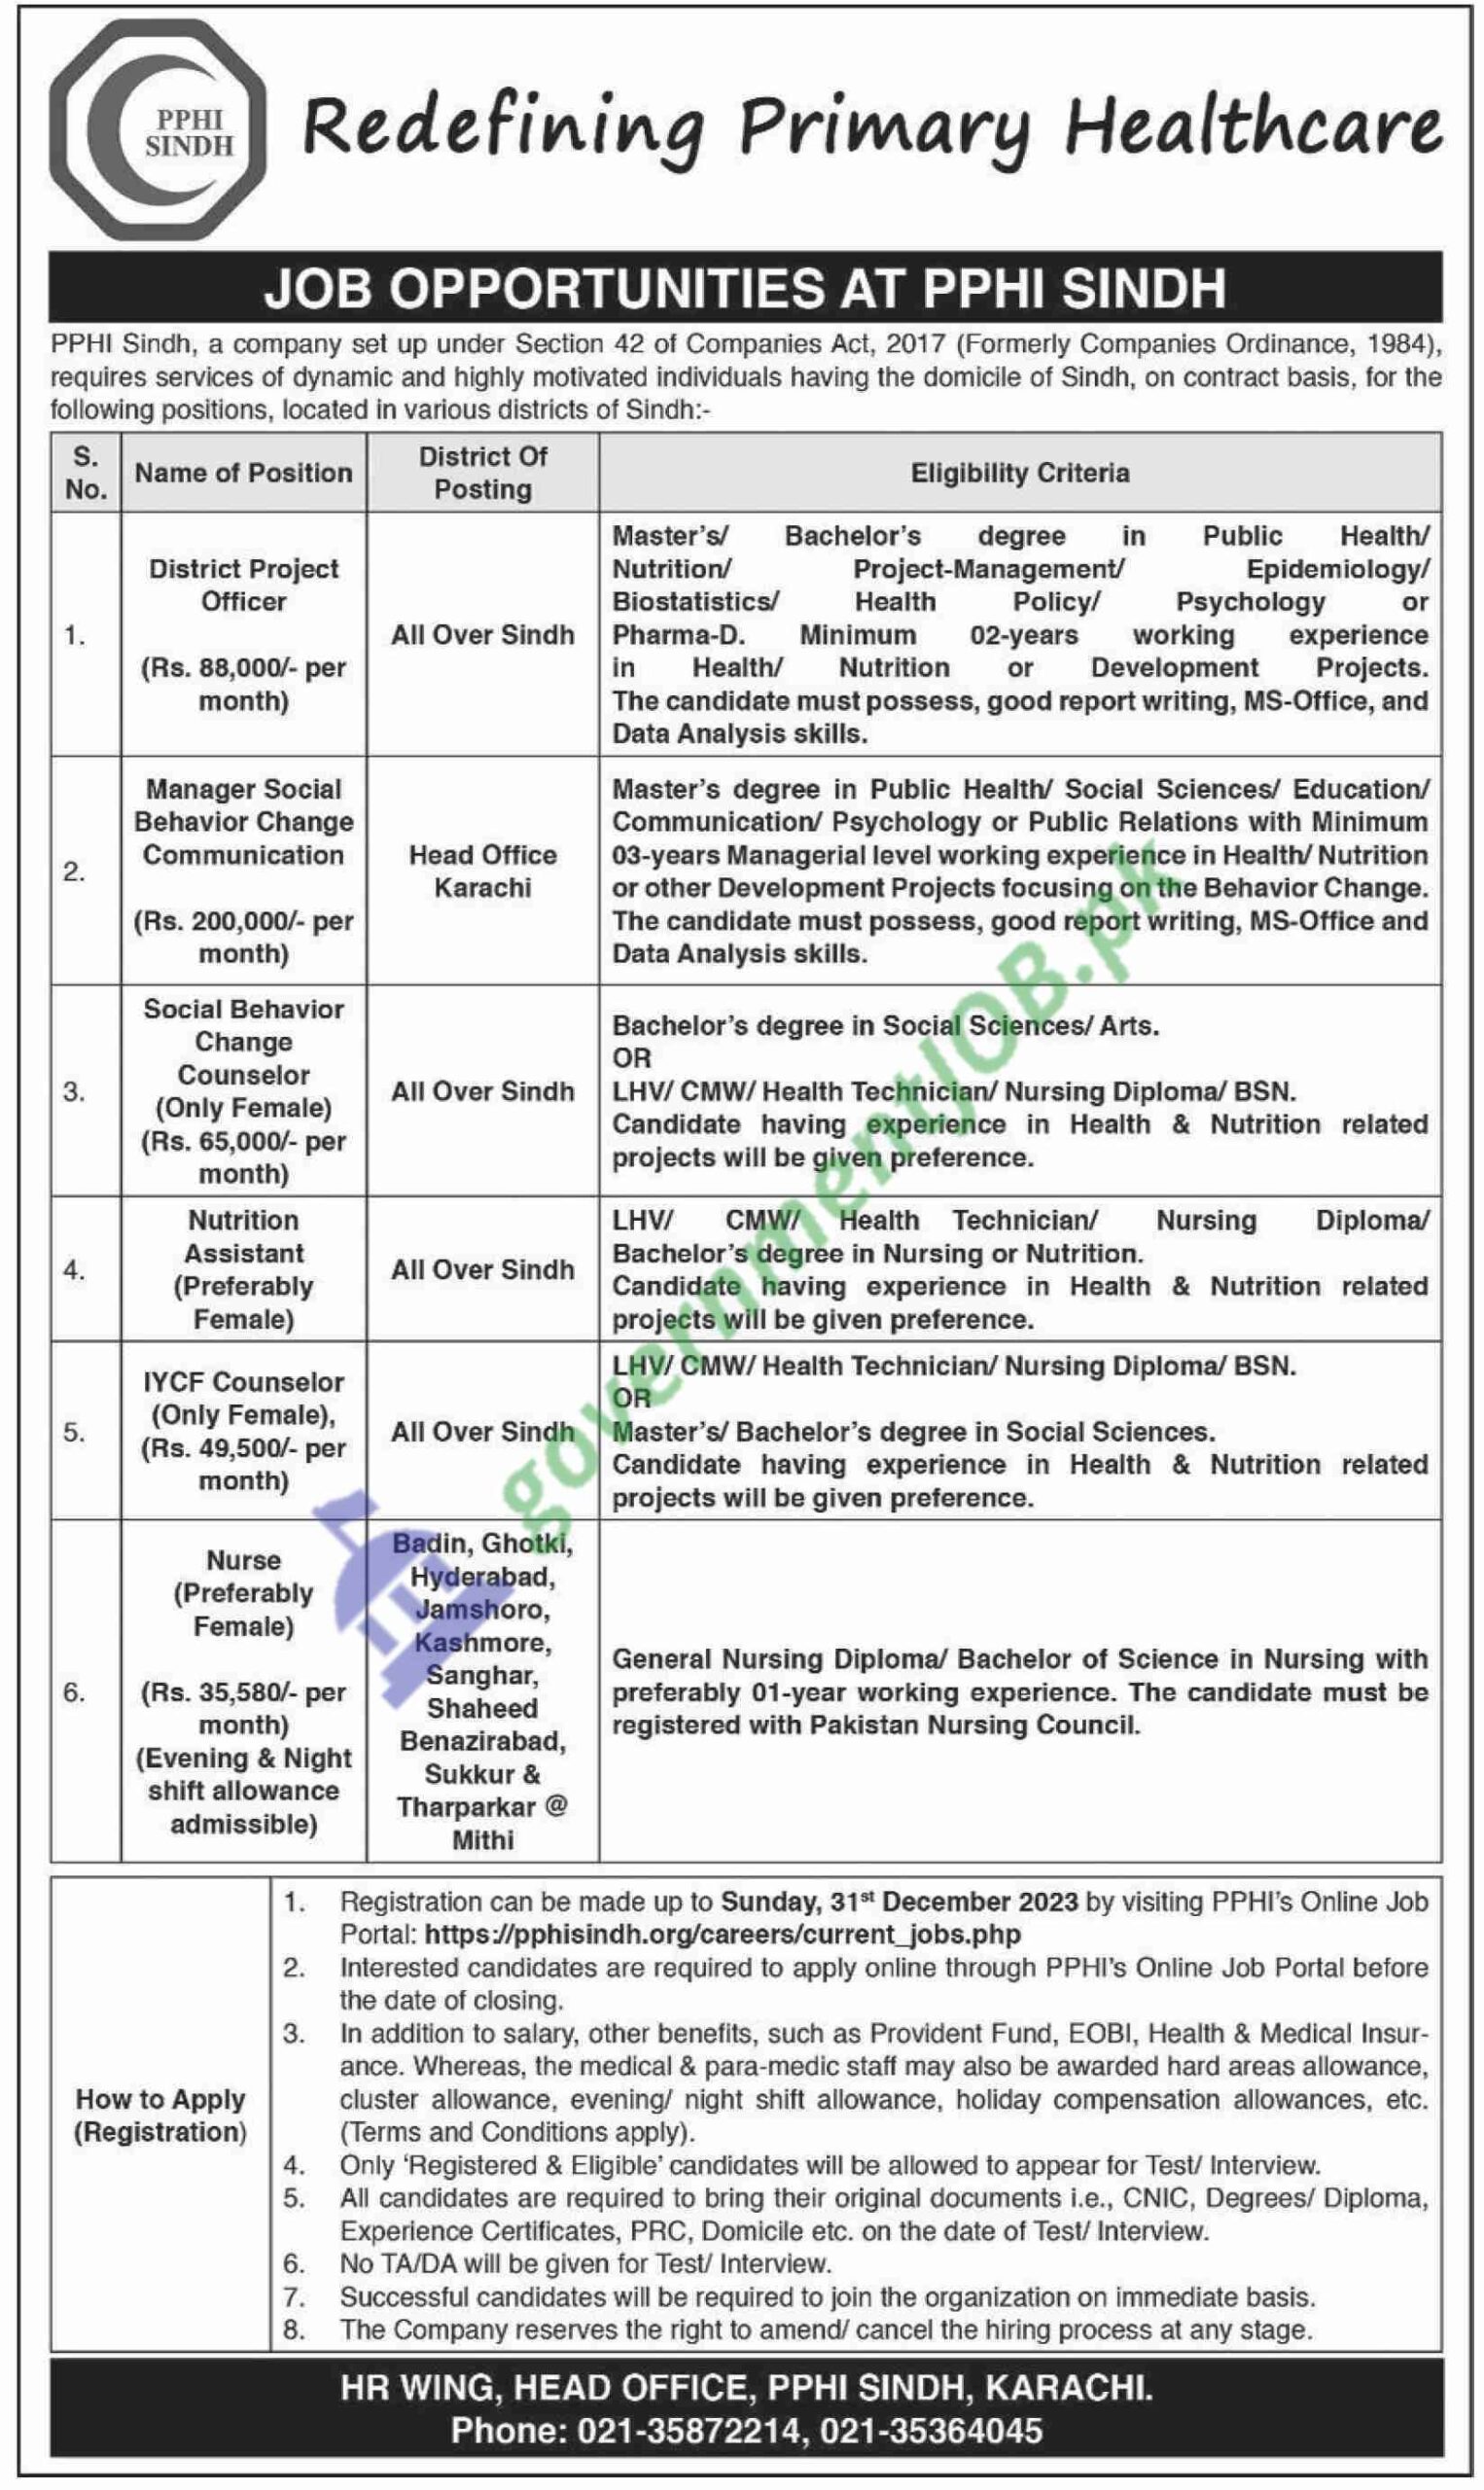 PPHI Sindh Job Opportunities 2023 - Redefining Primary Healthcare Sindh